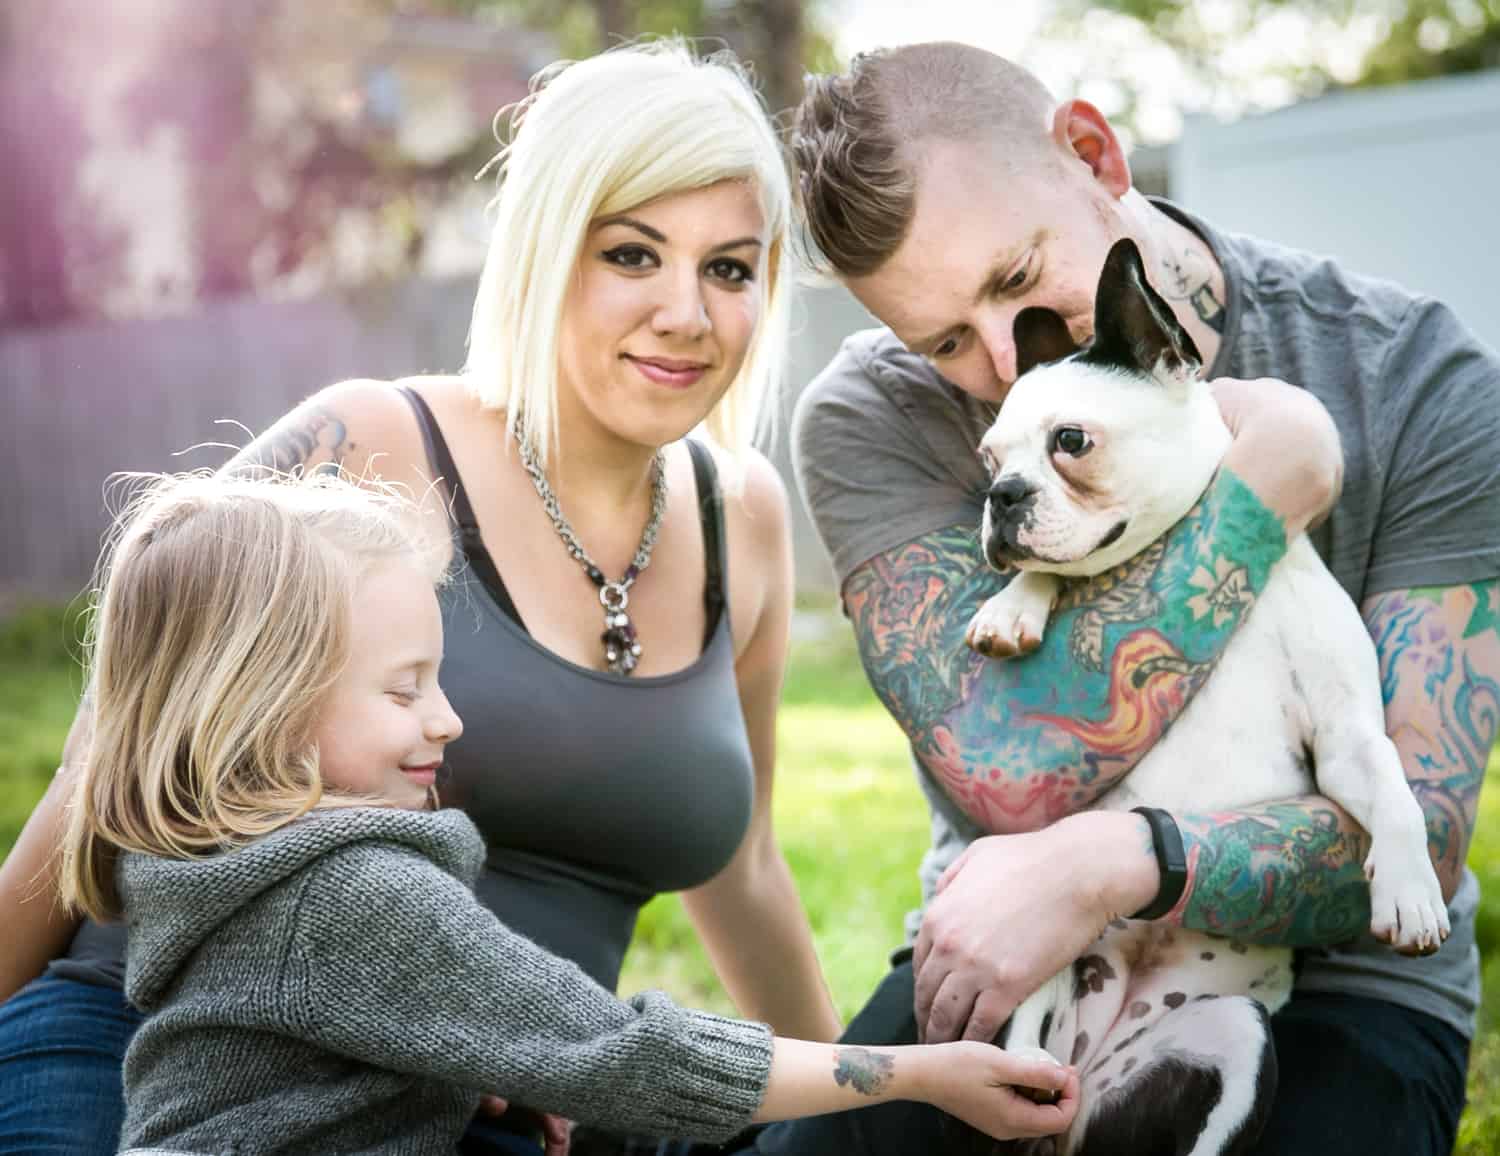 Pregnant woman, man, young girl and dog in backyard